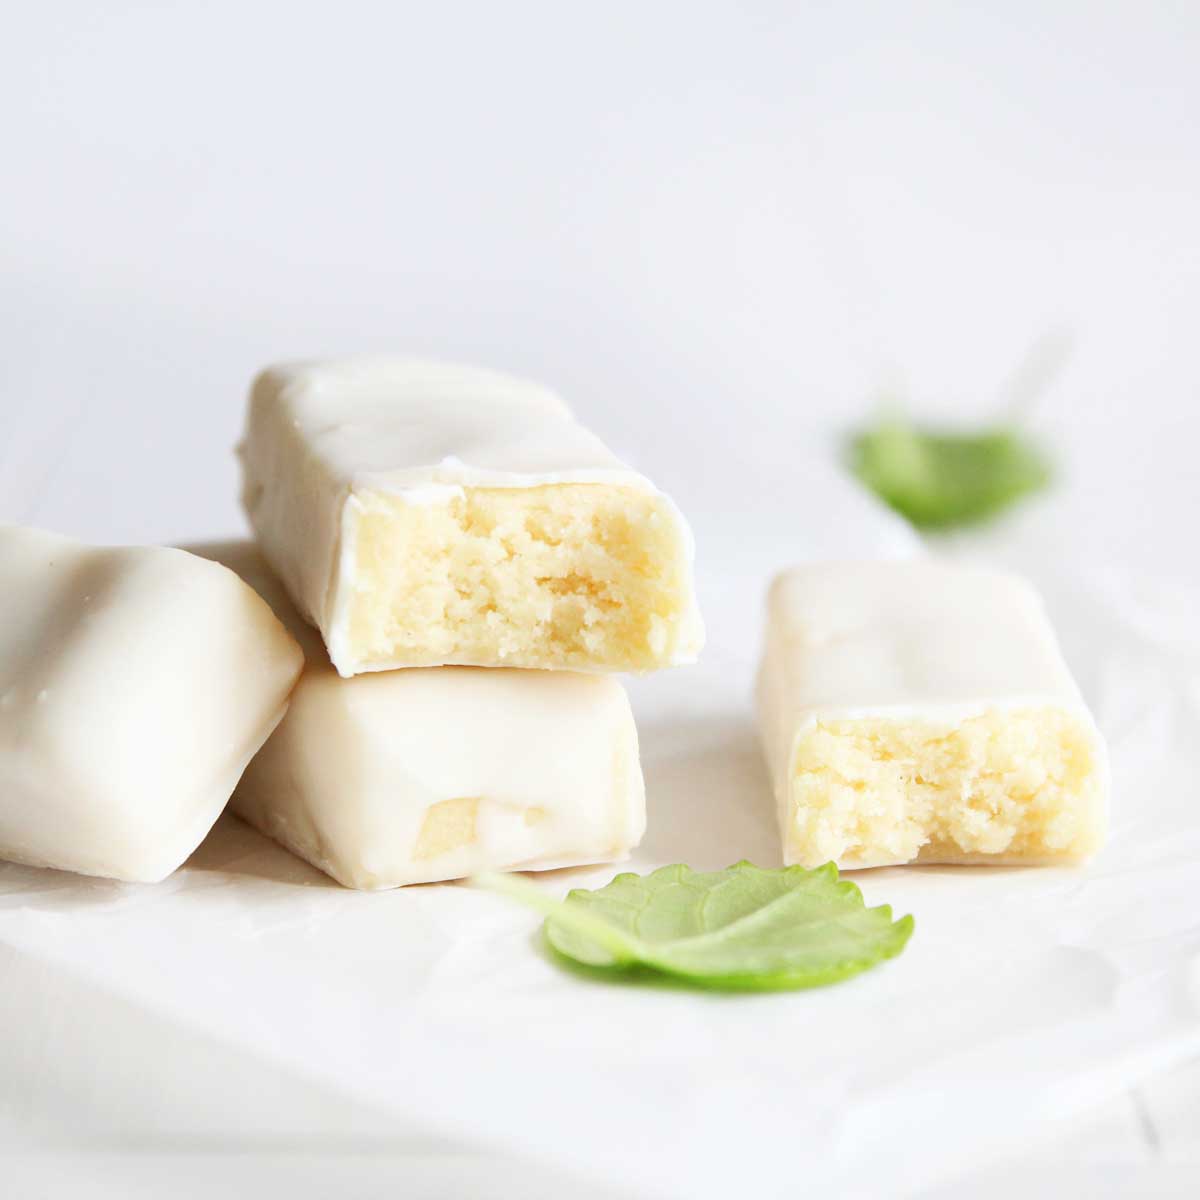 Chunky White Chocolate Macadamia Protein Bars Recipe (made with Collagen Peptides) - White Chocolate Macadamia Protein Bars